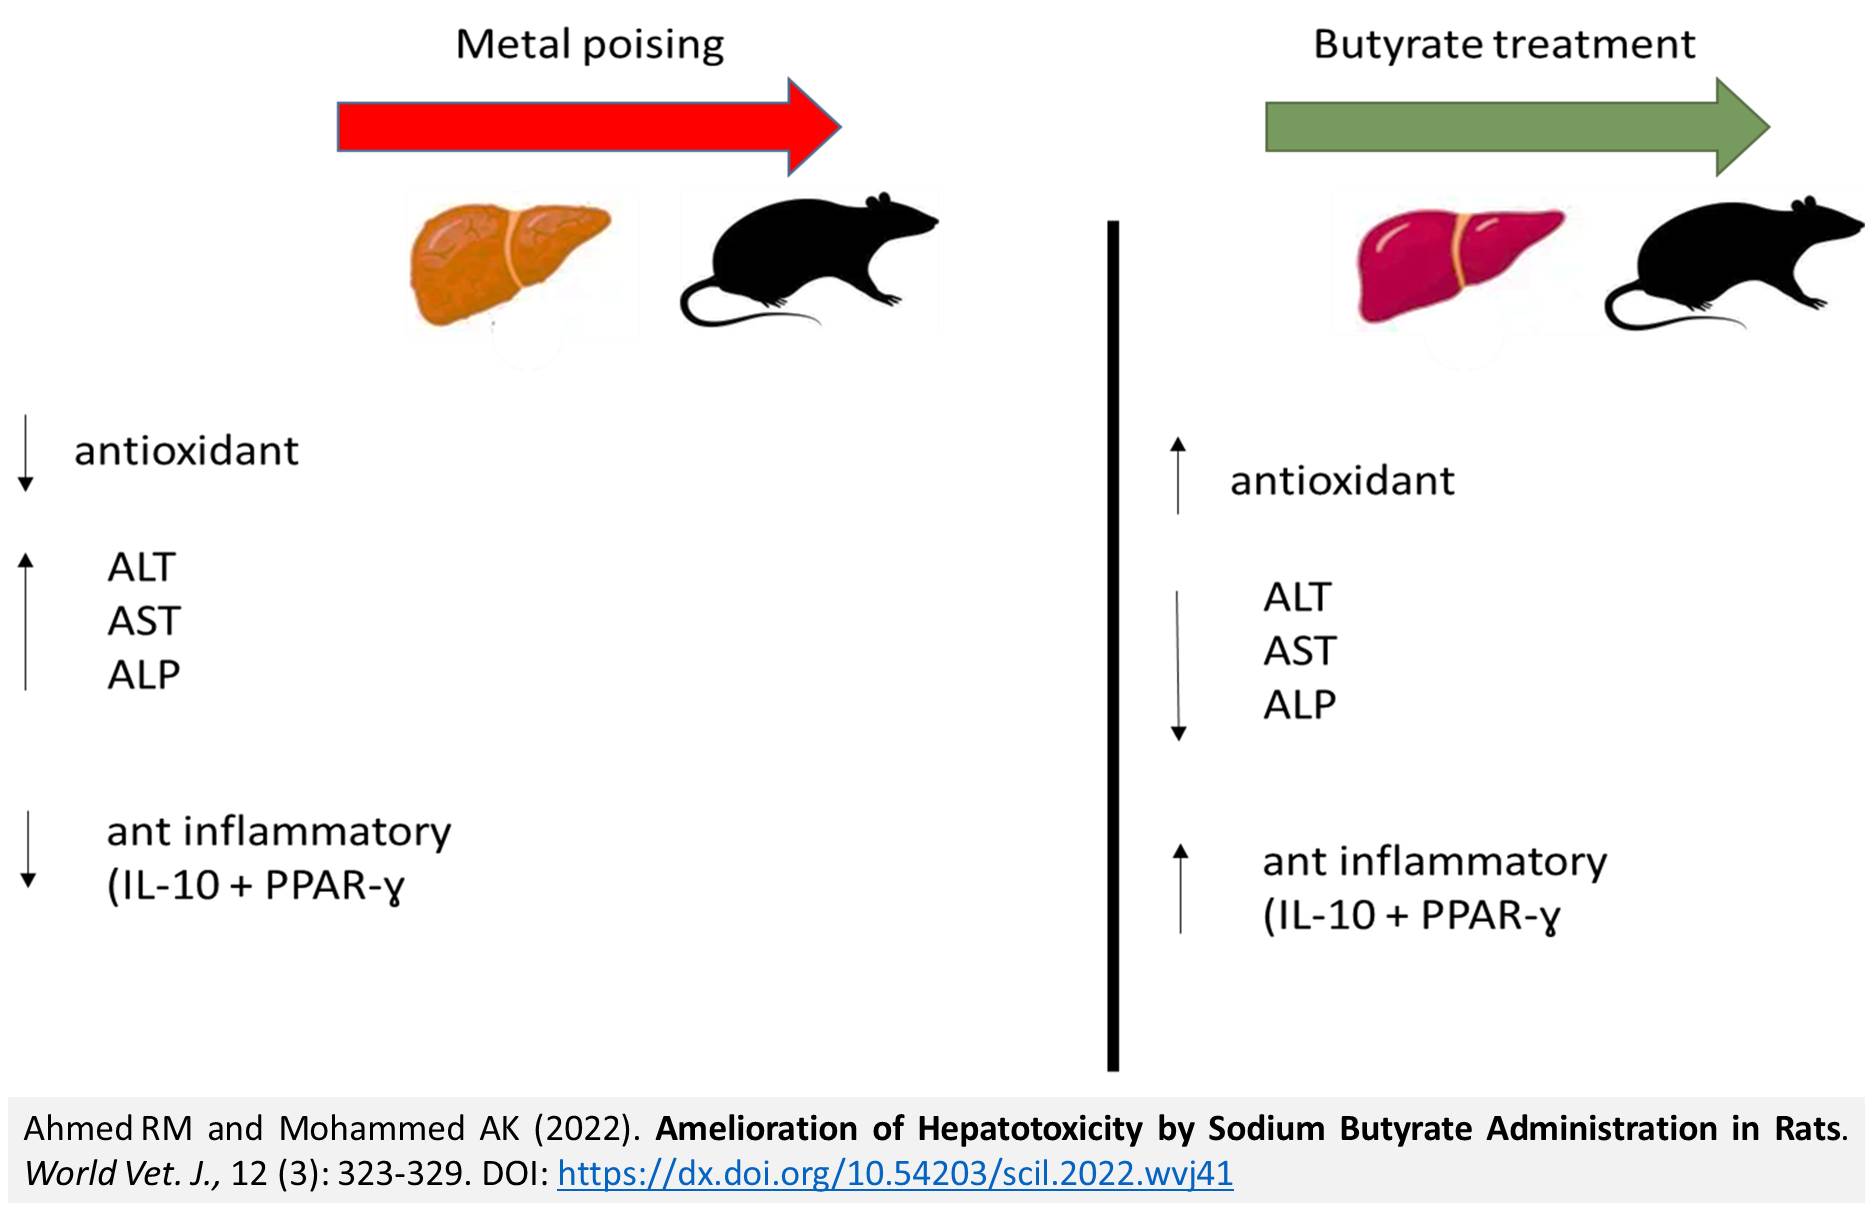 1900-20-Amelioration_of_Hepatotoxicity_by_Sodium_Butyrate_Administration_in_Rats